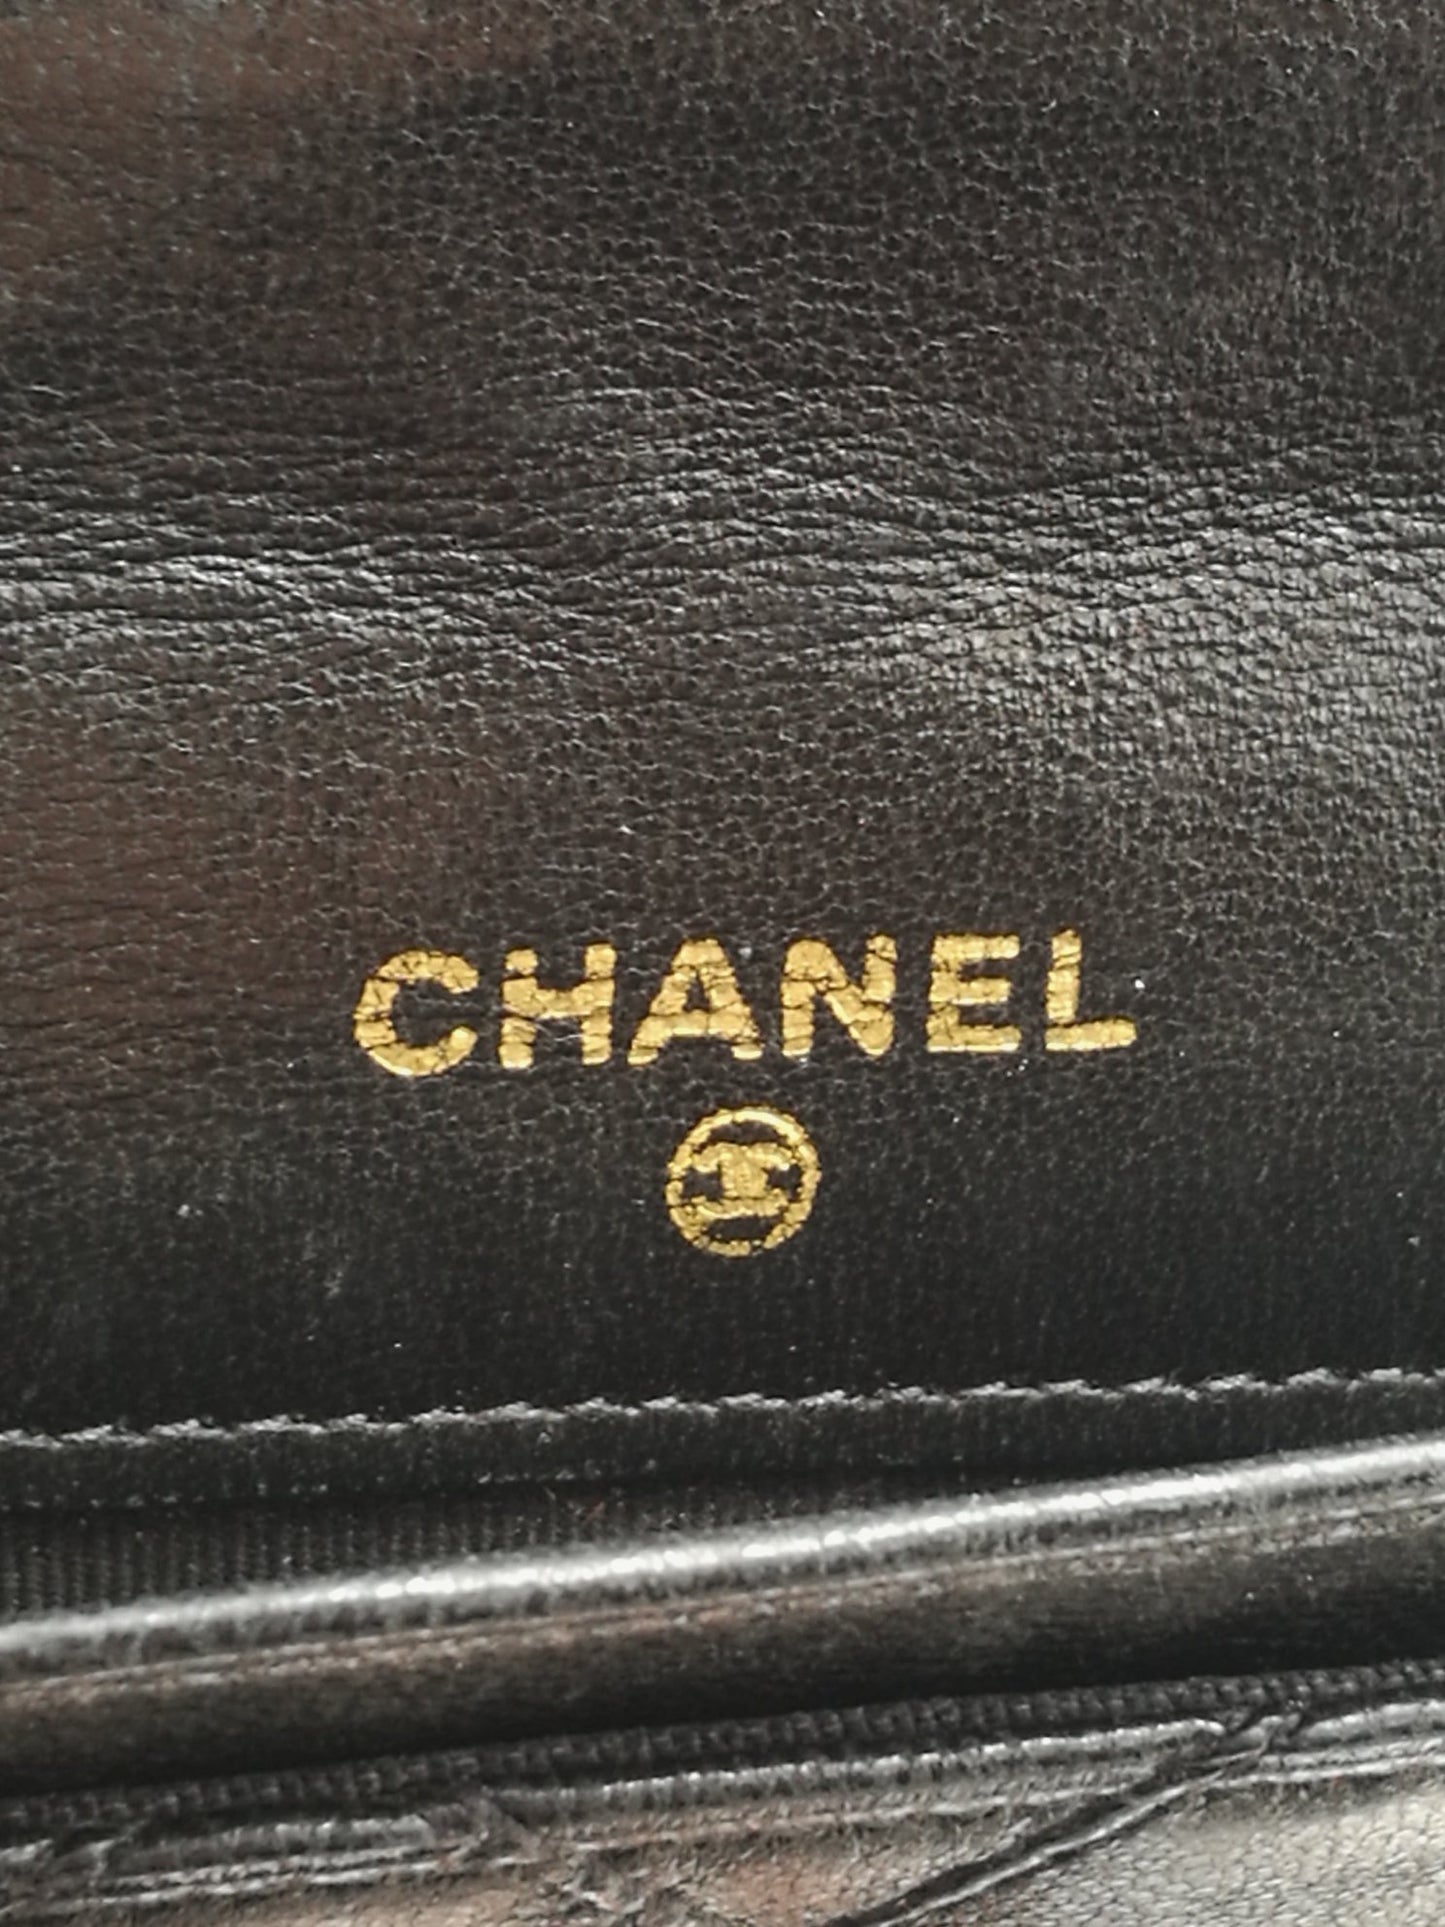 Chanel Cc coin wallet